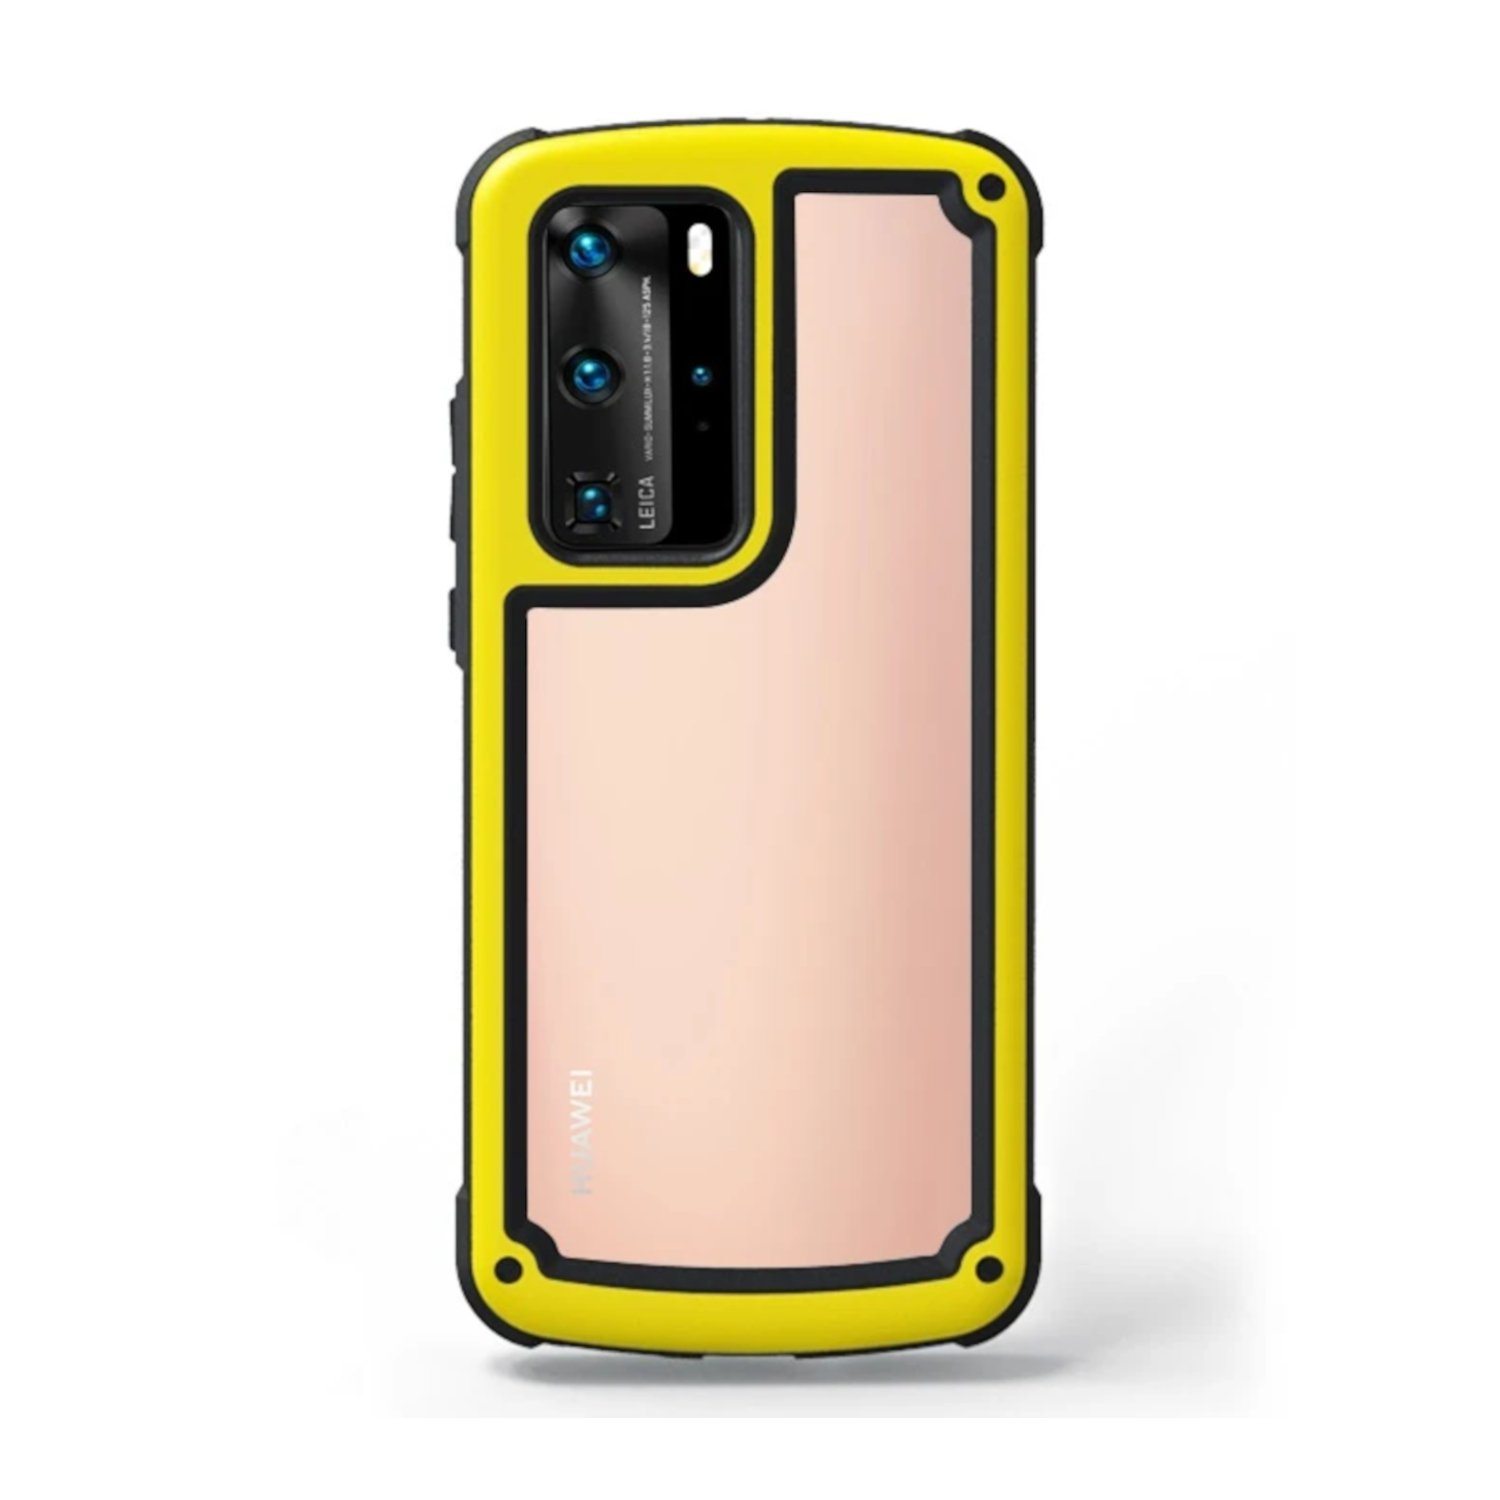 ROOT CO. Gravity Shock Resist Case for Huawei P40, Gloss Yellow Huawei P40 ROOT CO. 